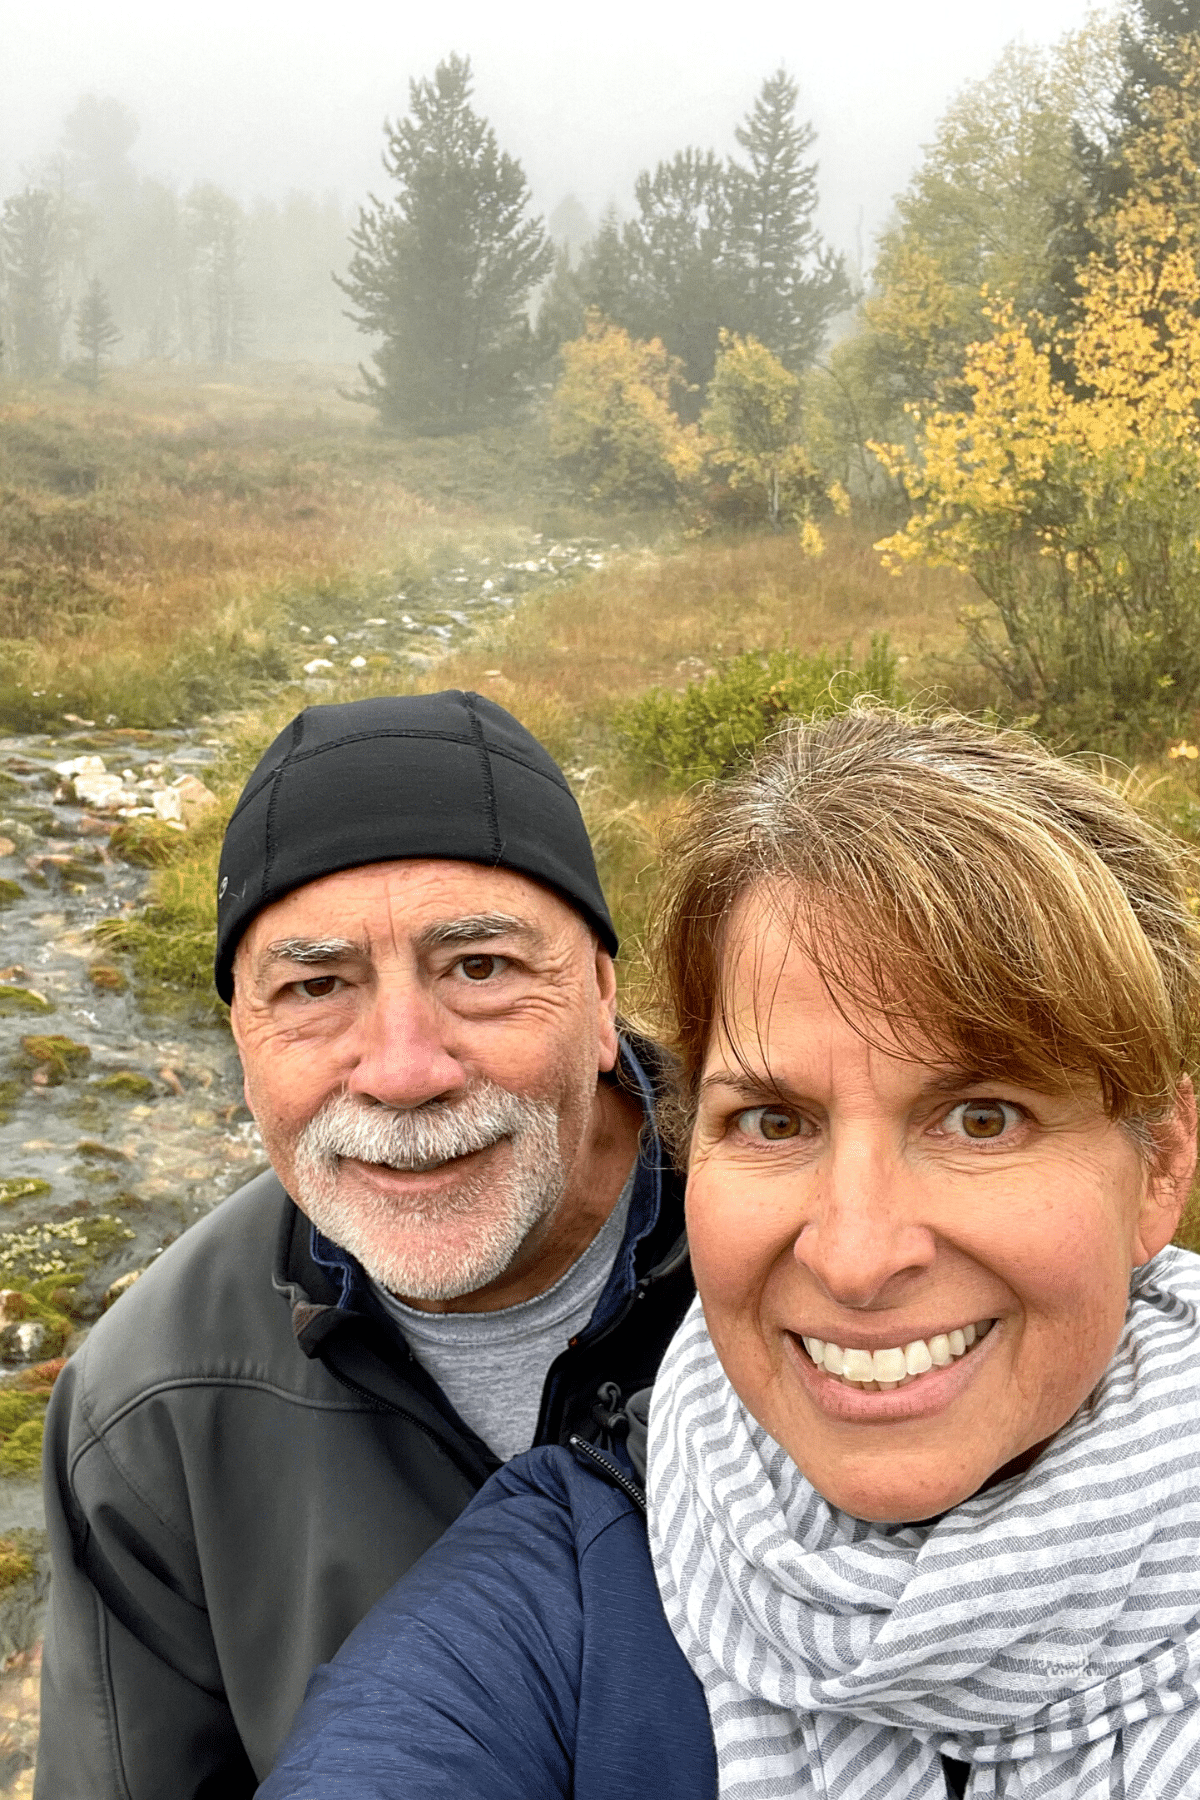 Me and the hubby on a light hike in the mist and drizzle. 